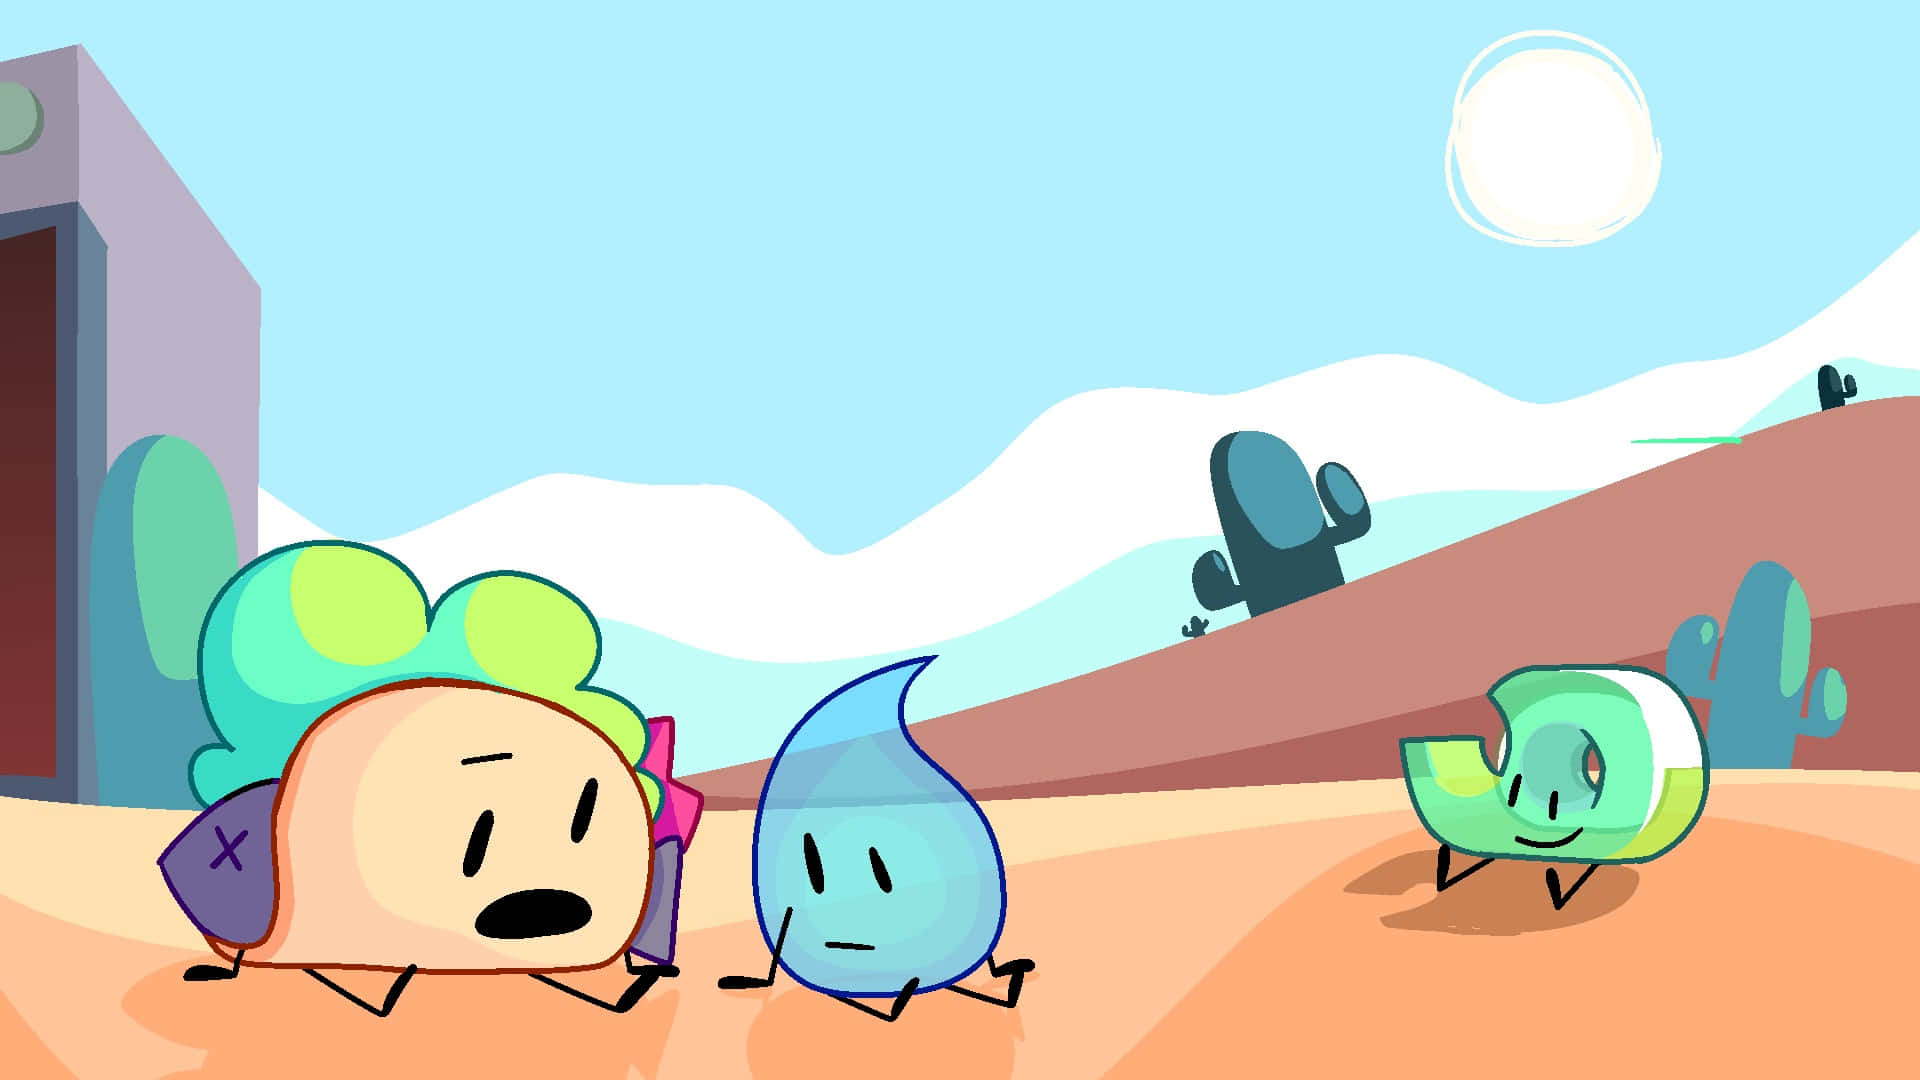 BFB Four wallpaper wallpaper by networkcatYT  Download on ZEDGE  002f